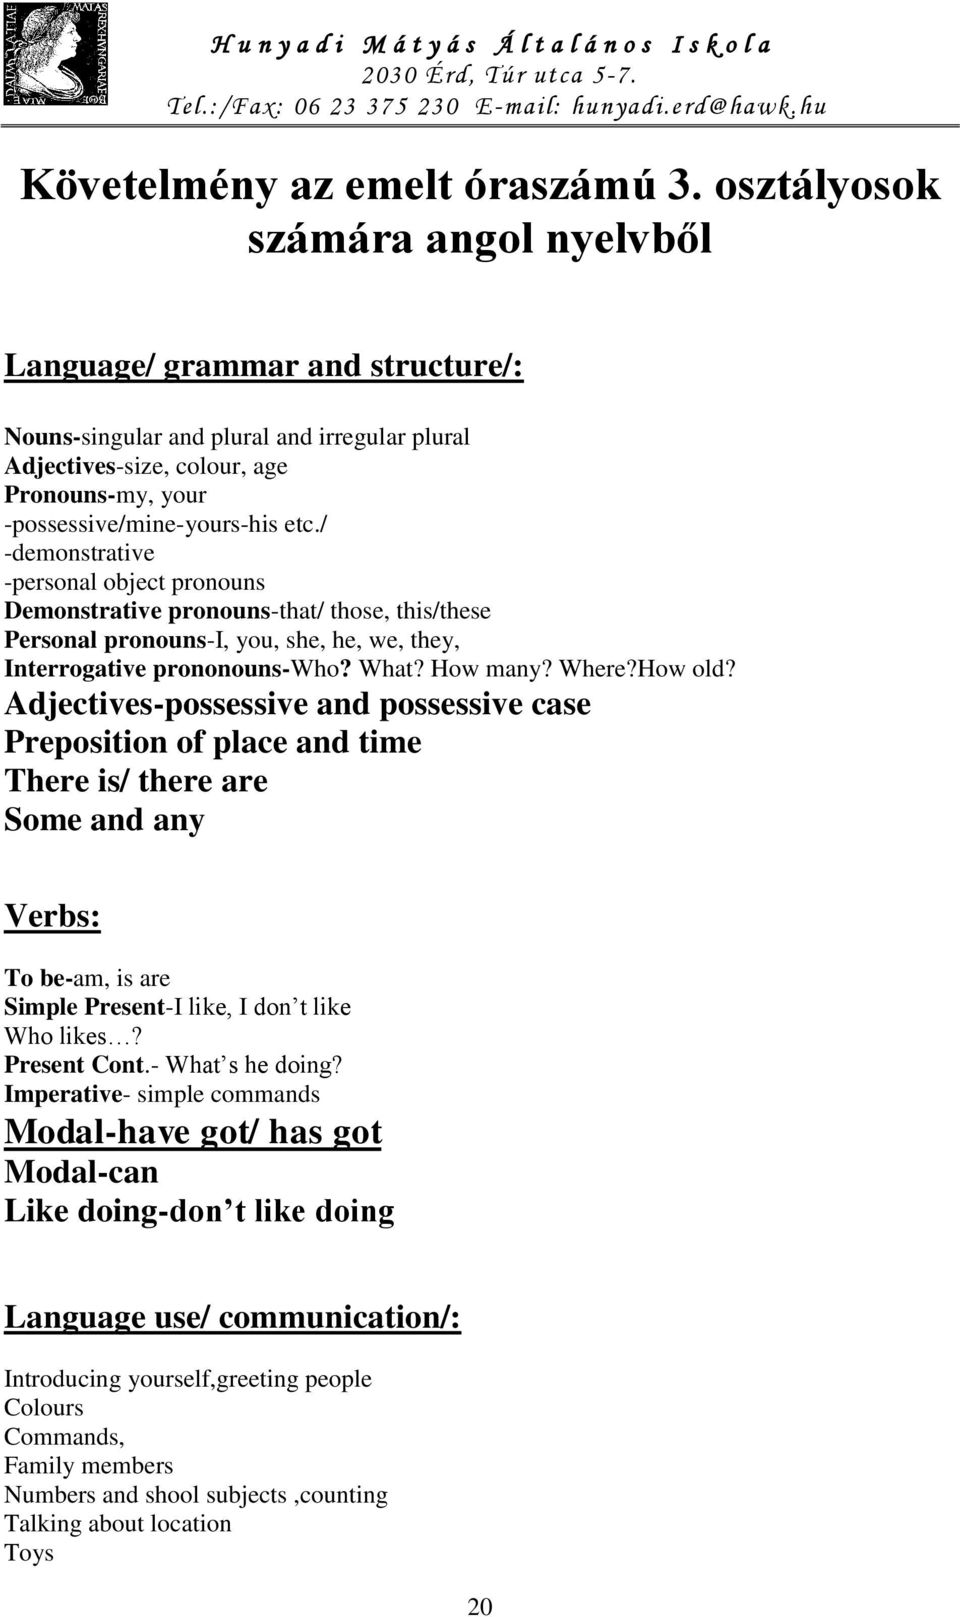 / -demonstrative -personal object pronouns Demonstrative pronouns-that/ those, this/these Personal pronouns-i, you, she, he, we, they, Interrogative prononouns-who? What? How many? Where?How old?